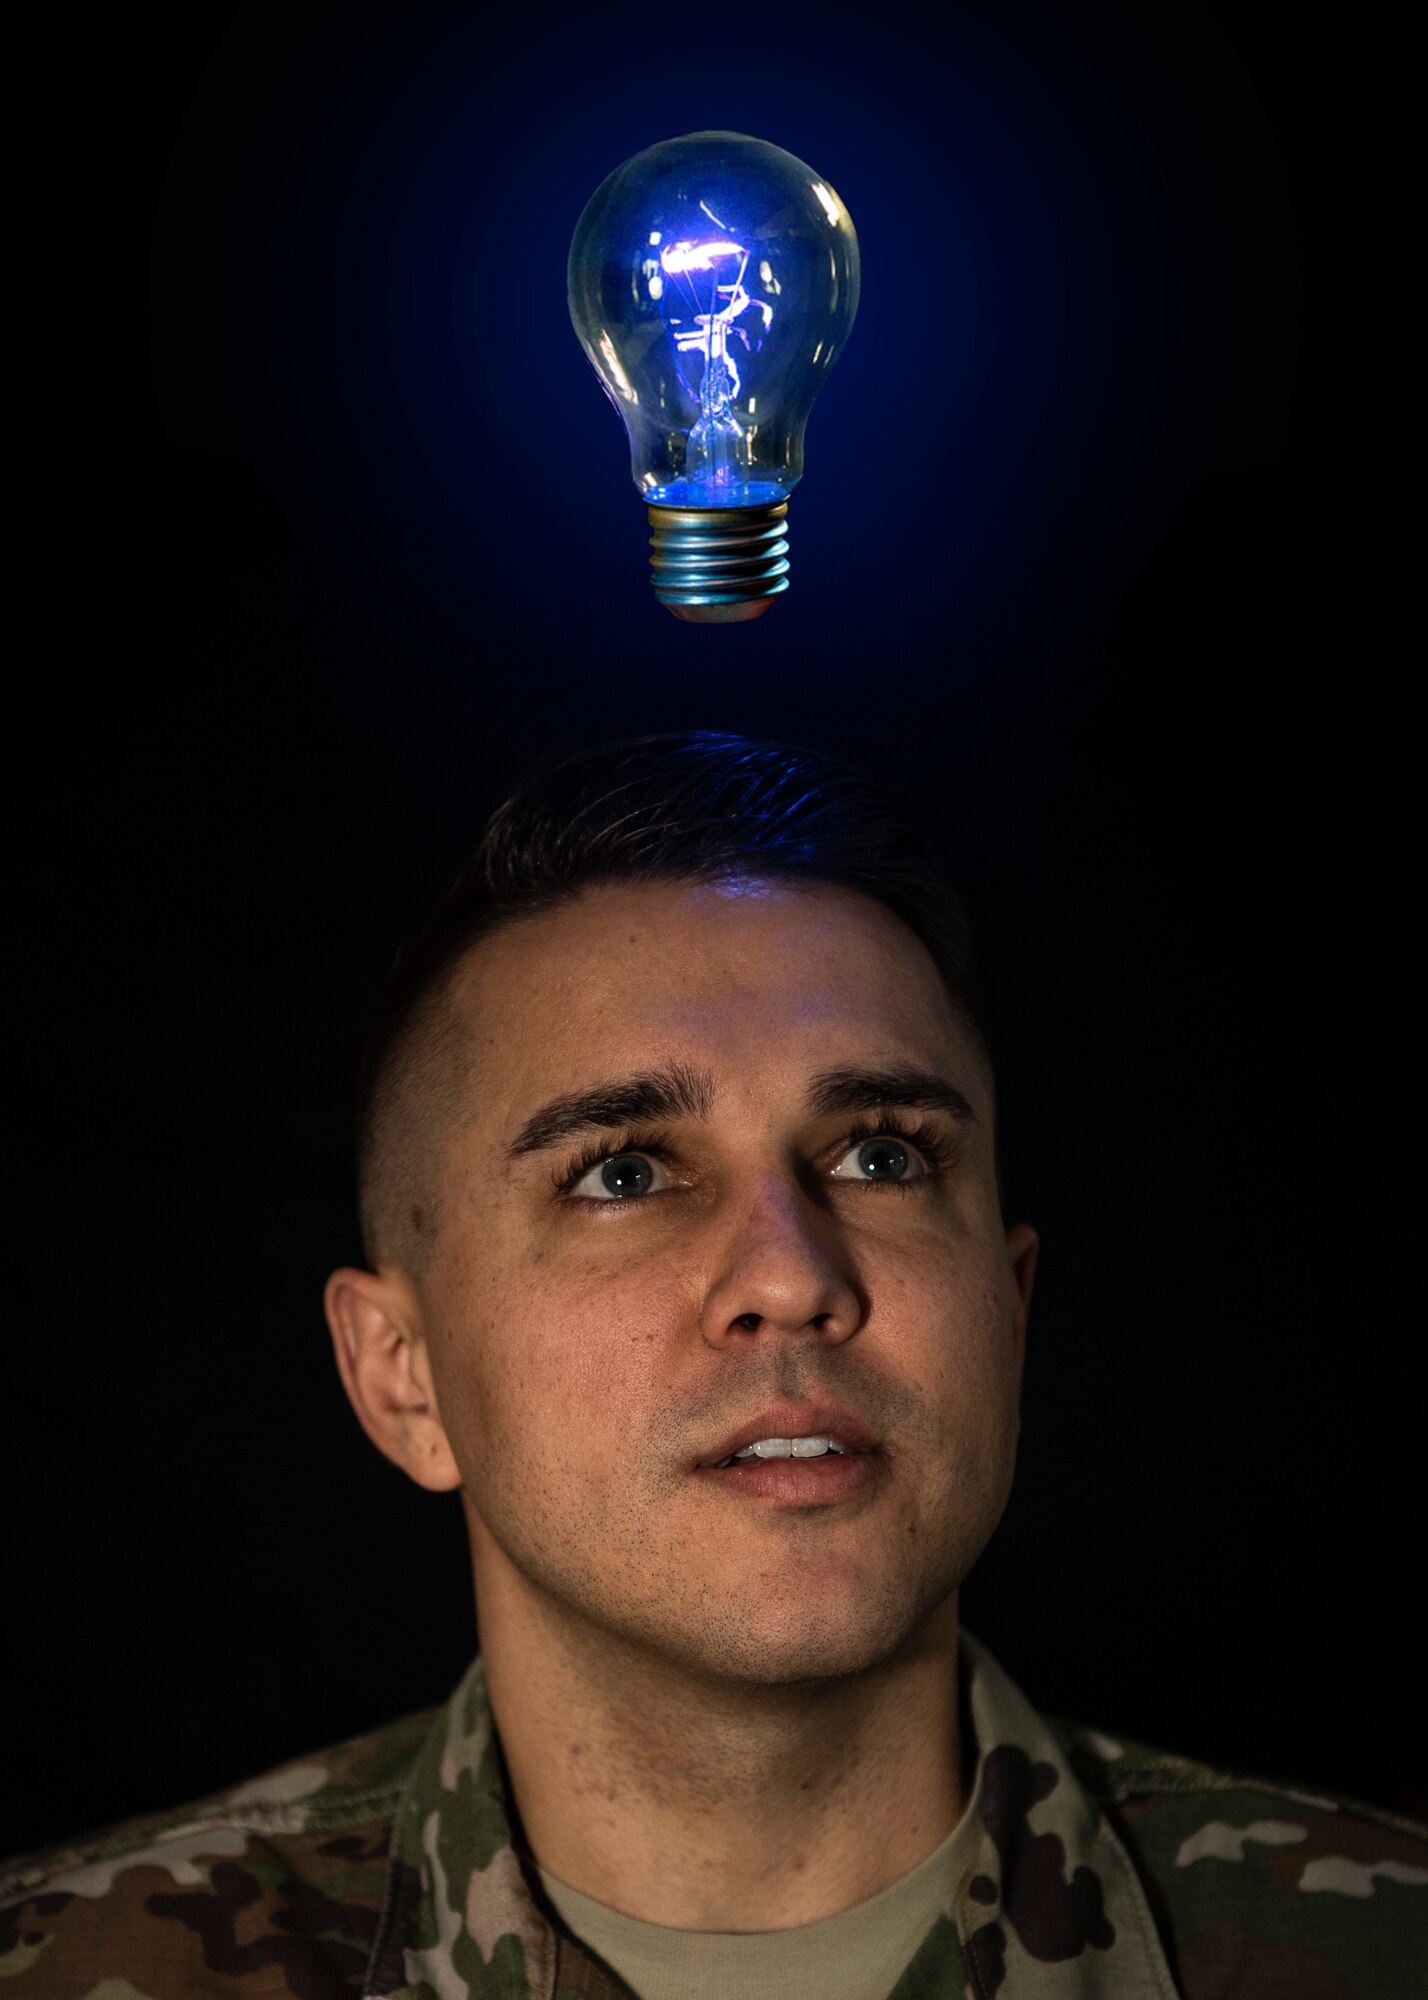 U.S. Air Force Staff Sgt. Preston Cherry, 52nd Fighter Wing Public Affairs photojournalist, poses for a photo illustration at Spangdahlem Air Base, Germany, Nov. 22, 2019. Airmen who have innovative ideas of how to better their workplace can contact the 52nd Innovation and Transformation Office. The ITO team teaches Airmen about continual process improvement, which can improve productivity and morale. (U.S. Air Force photo illustration by Airman 1st Class Valerie Seelye)